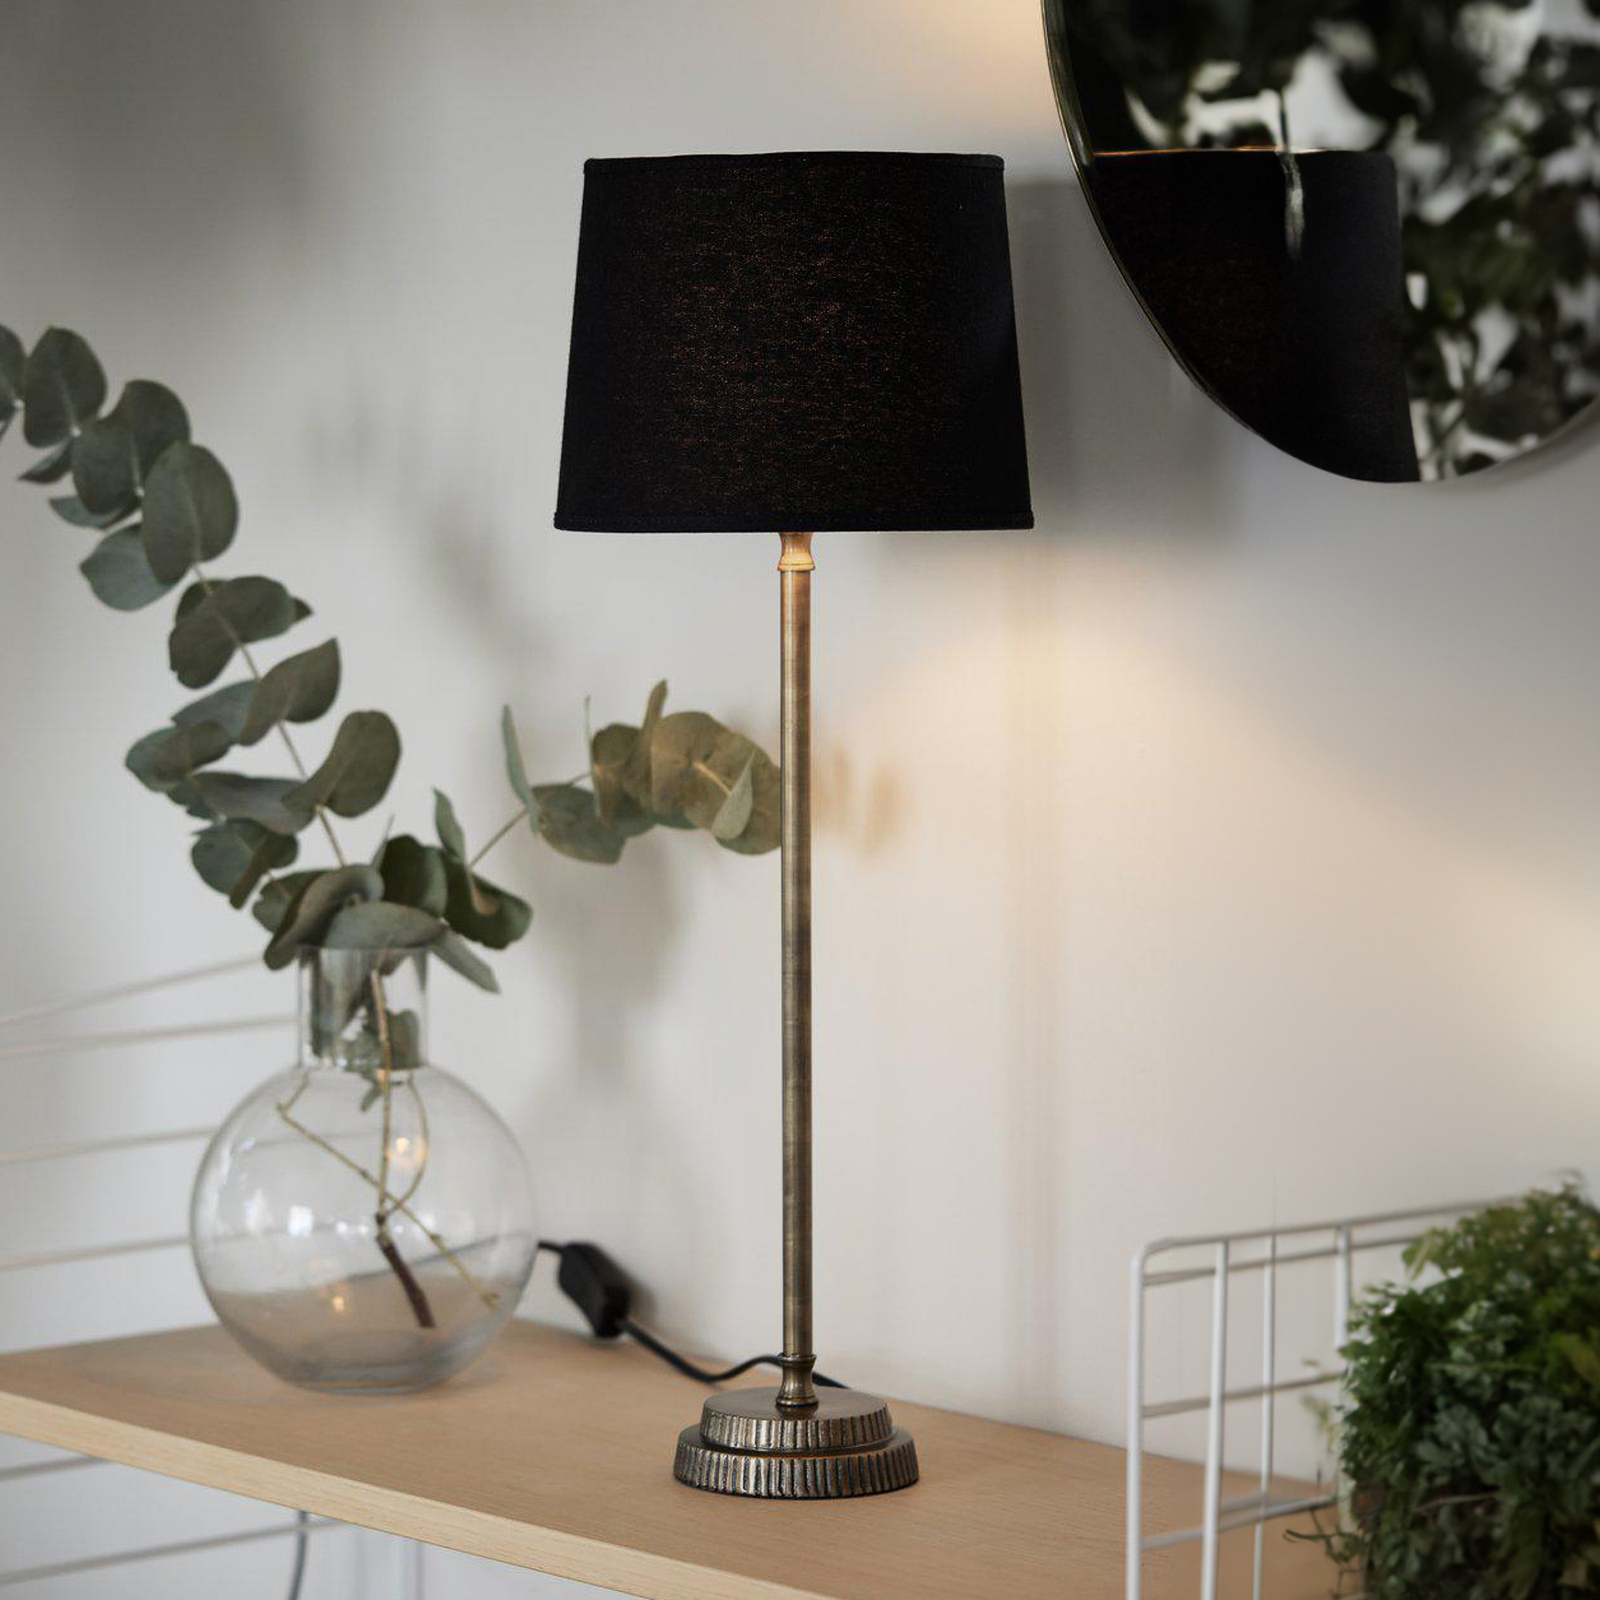 PR Home Kent table lamp, black/brass, conical lampshade